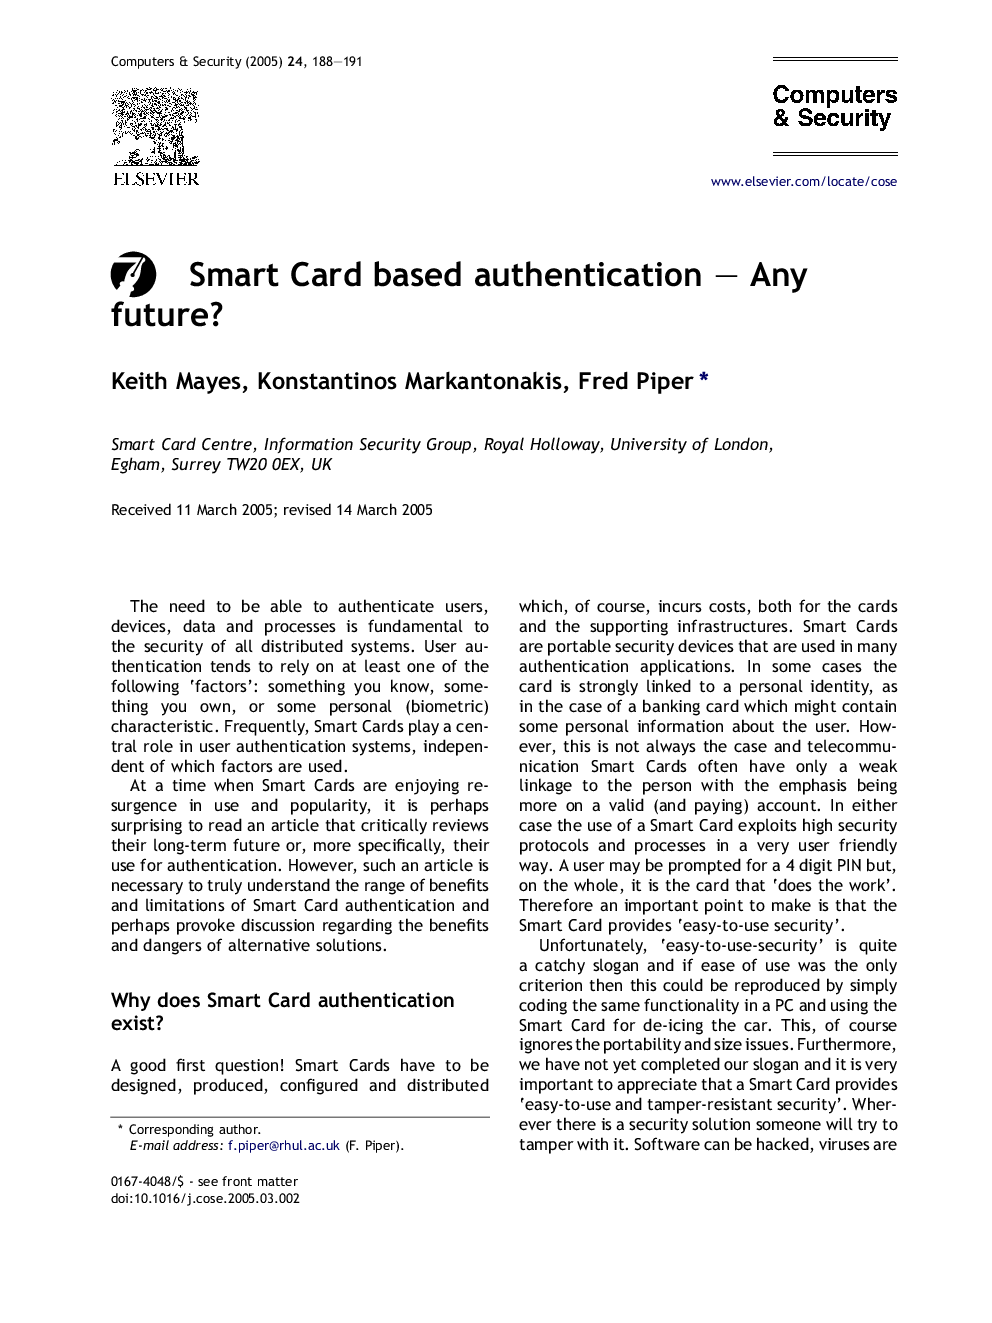 Smart card based authentication - any future?